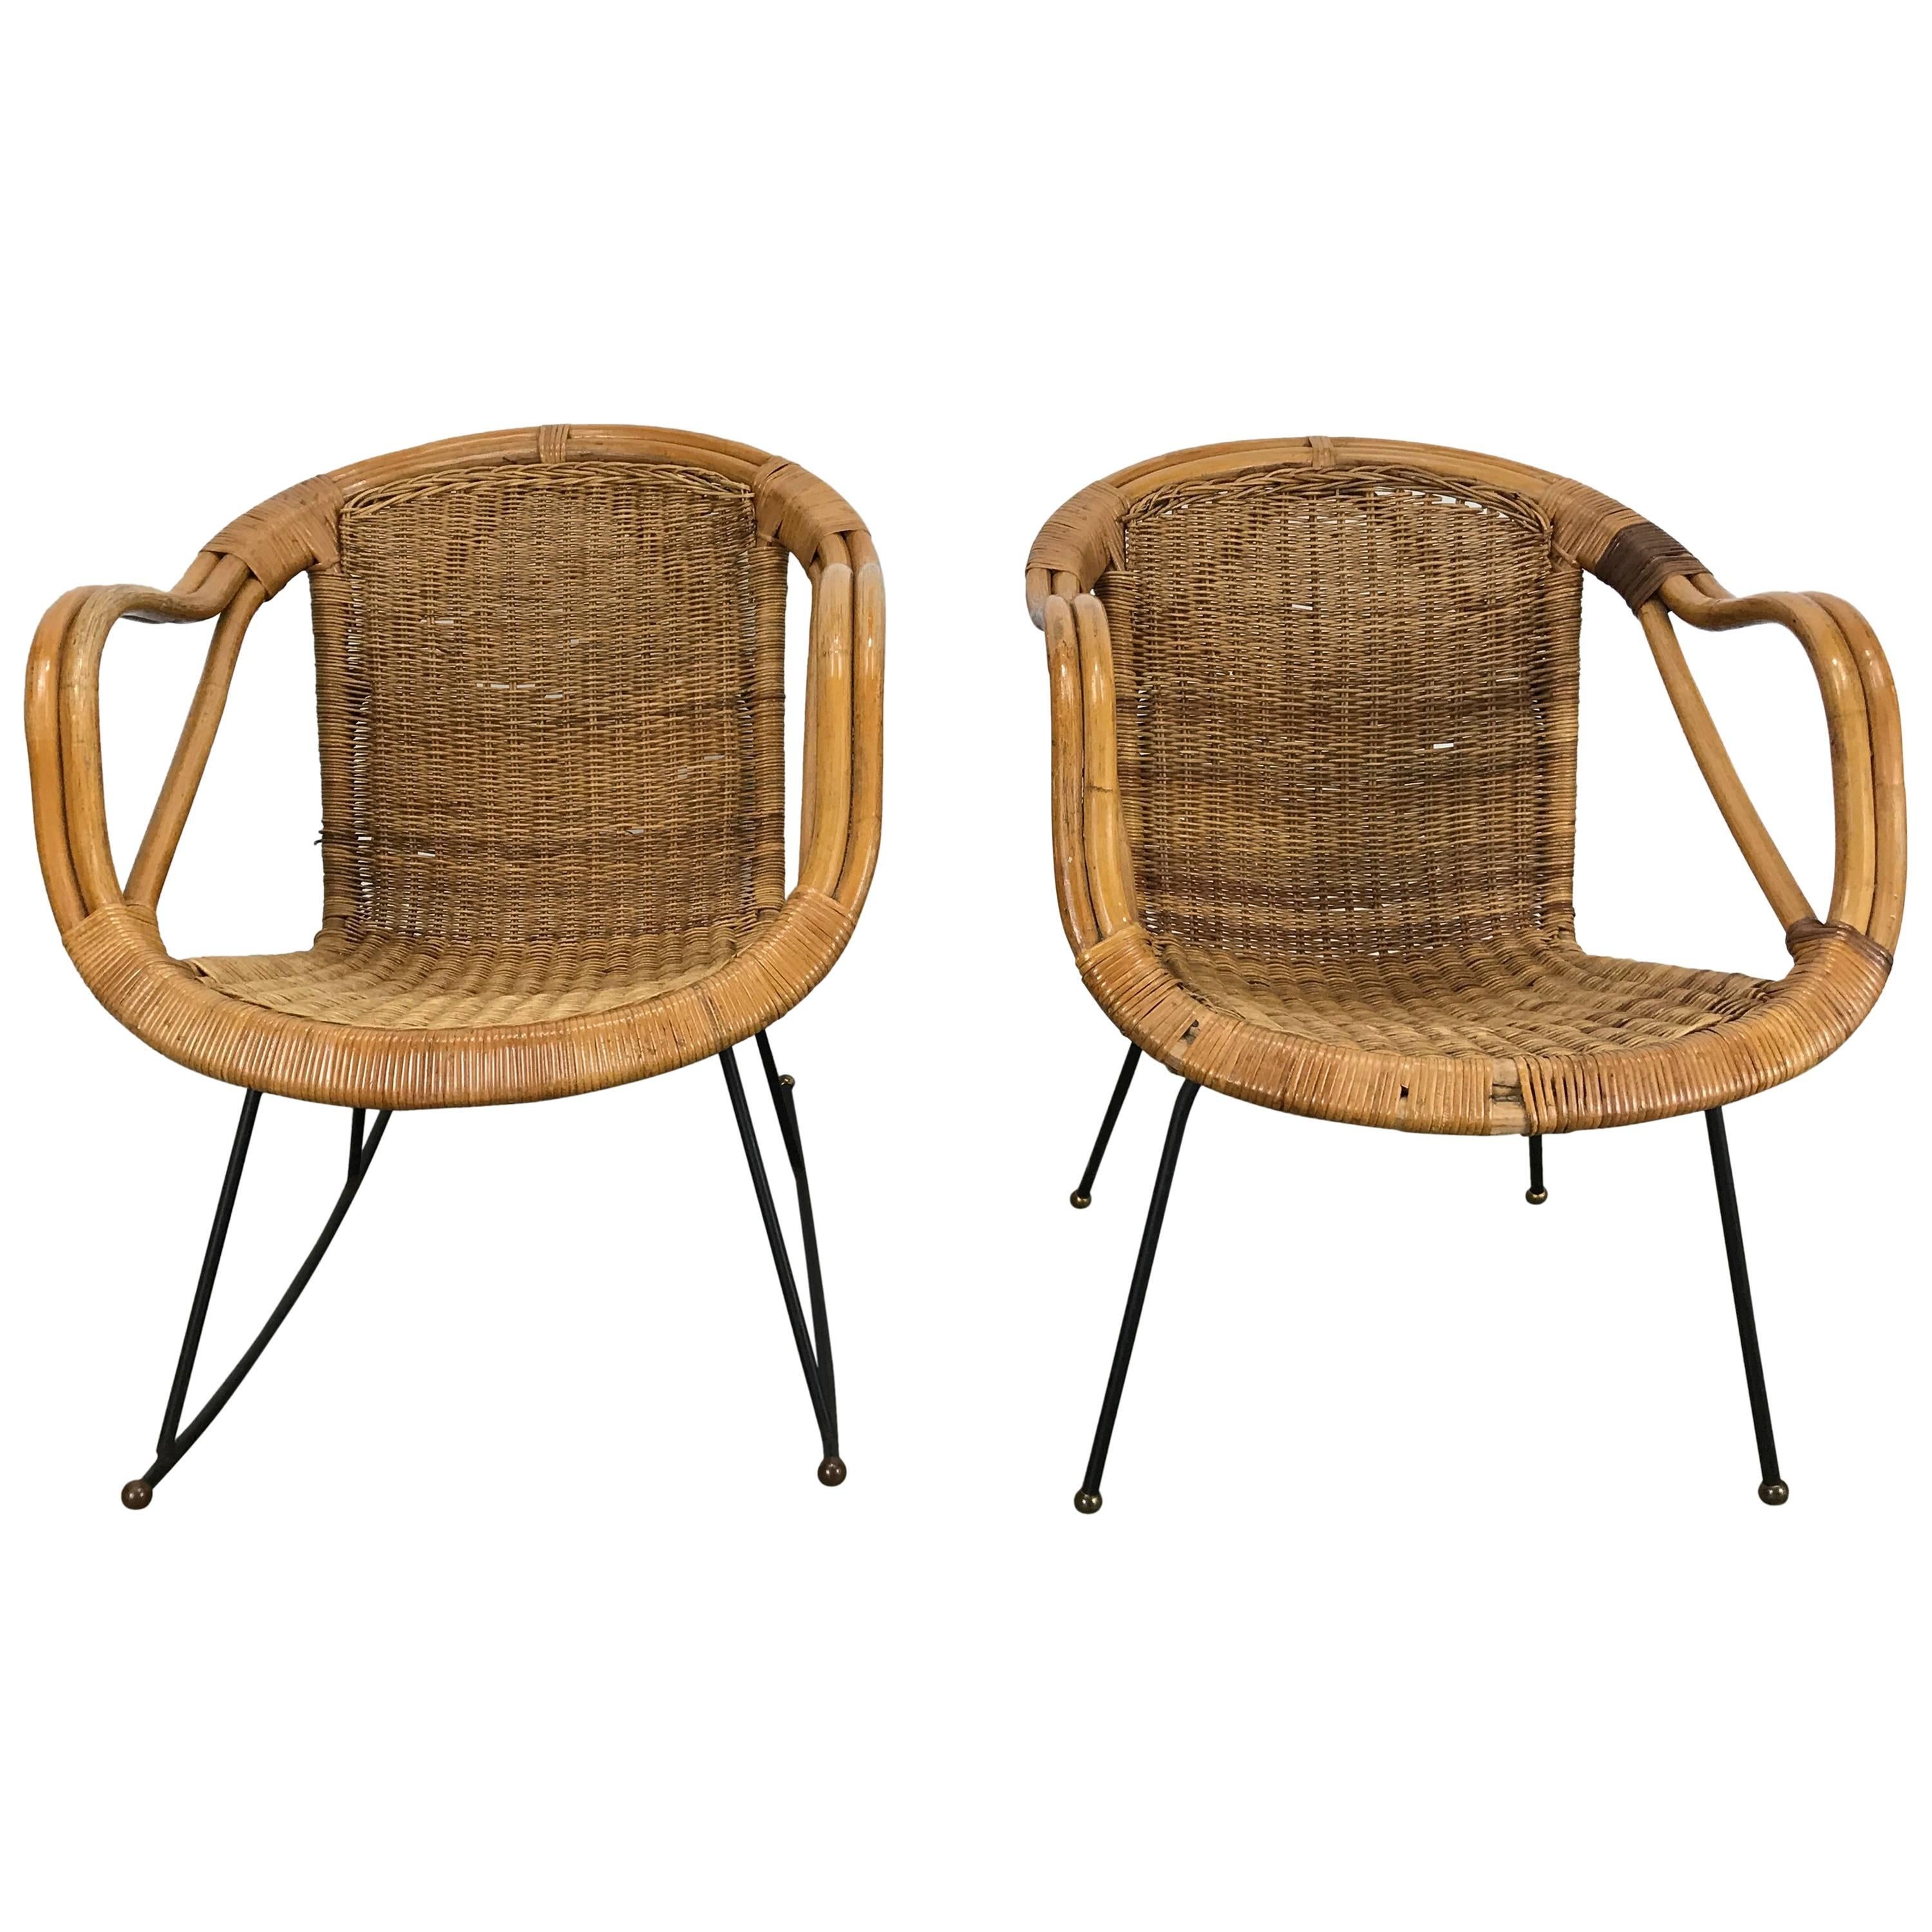 Pair of Mid-Century Modern Wicker and Iron Lounge Chairs, Garden or Patio